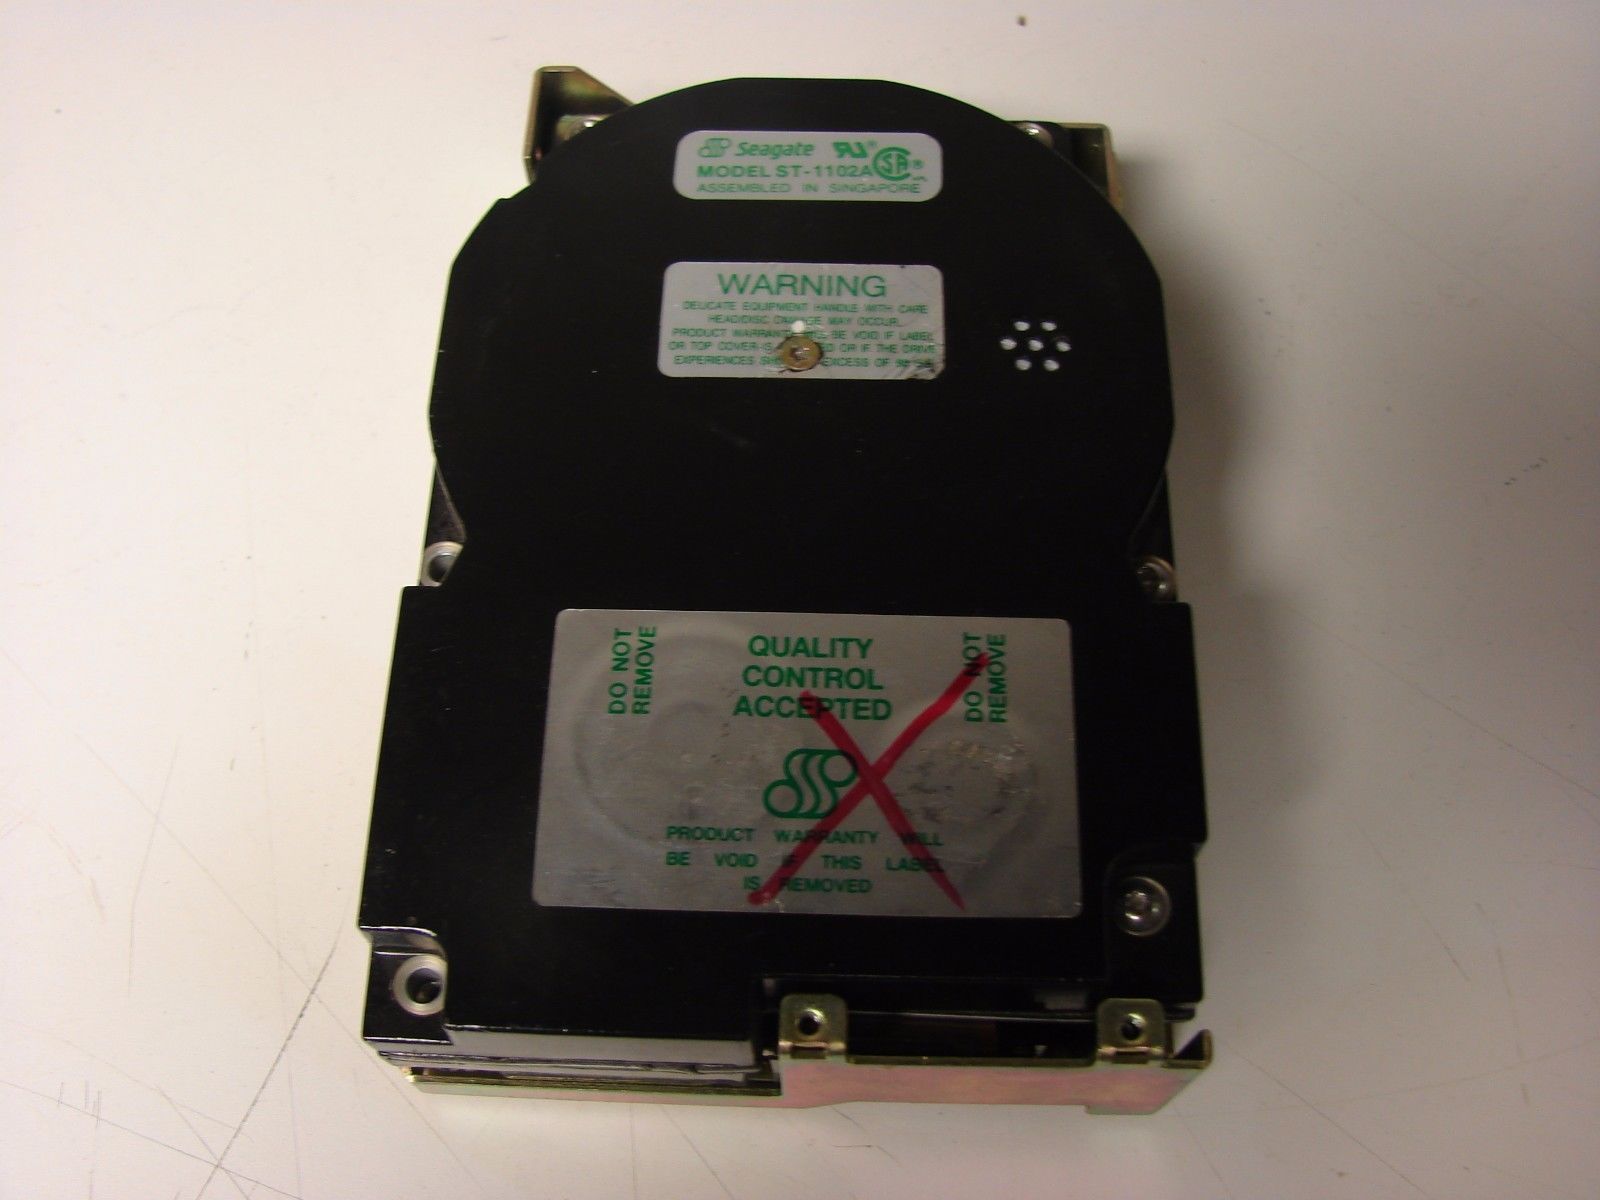 Vintage Seagate ST-1102A ide hard disk drive non working ST1102A #2 - $6.93